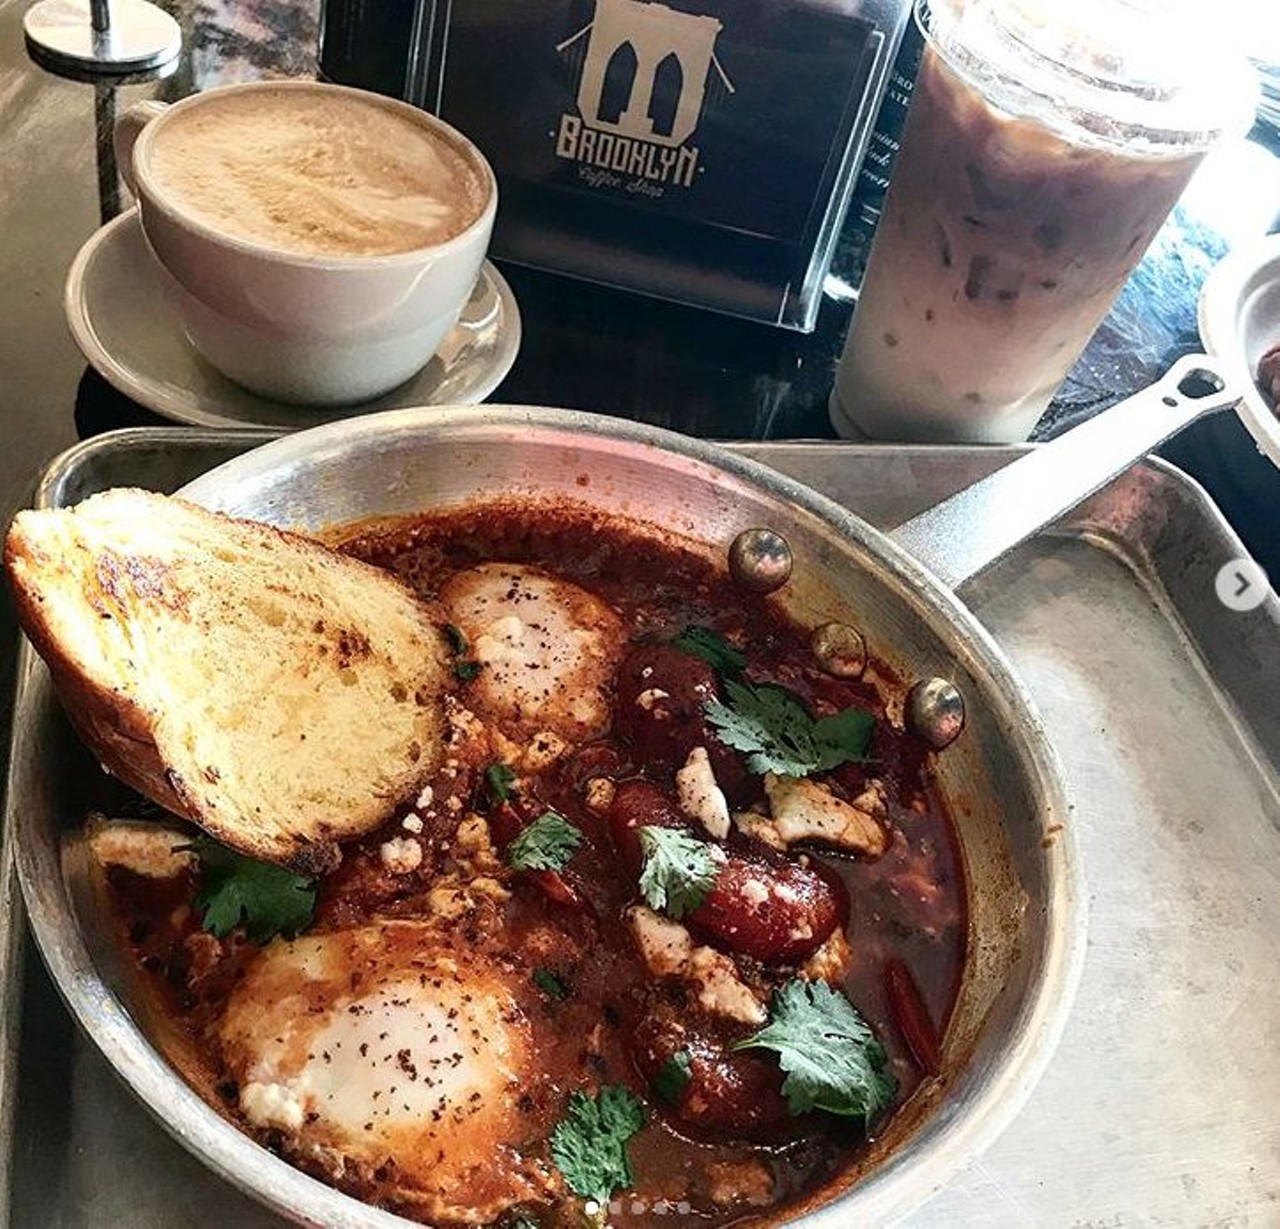 Brooklyn Coffee Shop
Besides coffee, this new option in the heart of Mills 50 also serves food. We like their shakshuka &#150; eggs baked in a spicy red tomato-and-pepper sauce &#150; served daily from 11 a.m. for $7, though $2 Empanada Mondays are also worth a look.
Photo via  orlando.treasures/Instagram